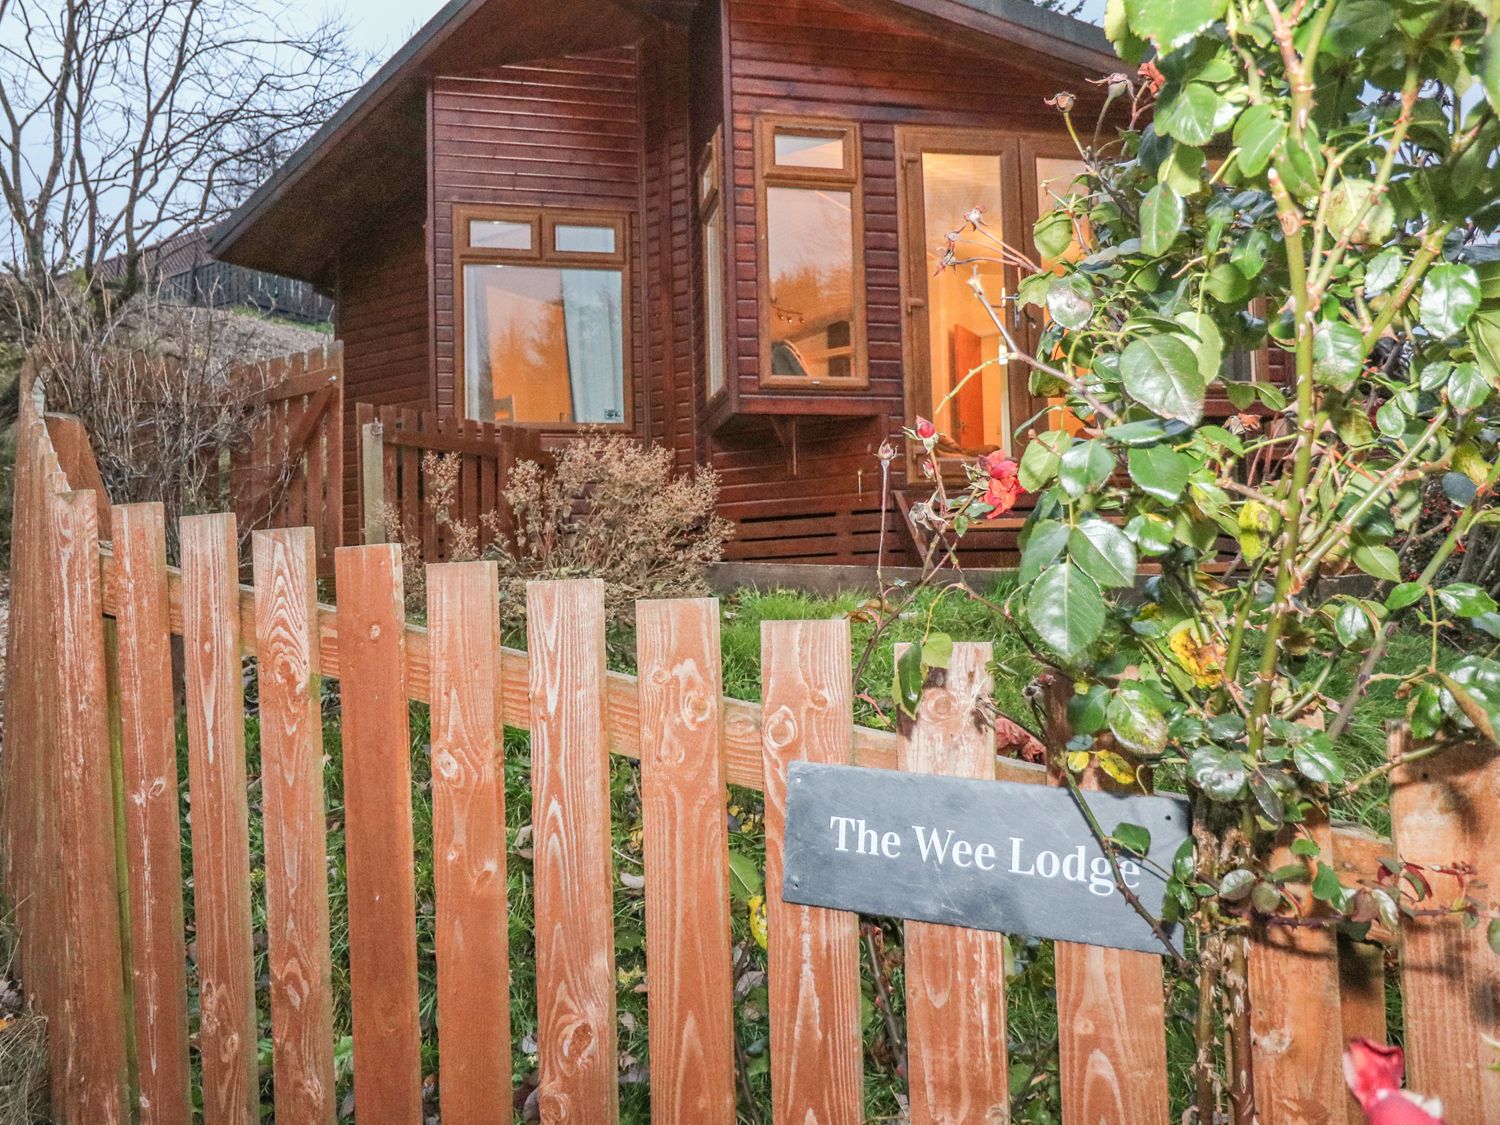 The Wee Lodge